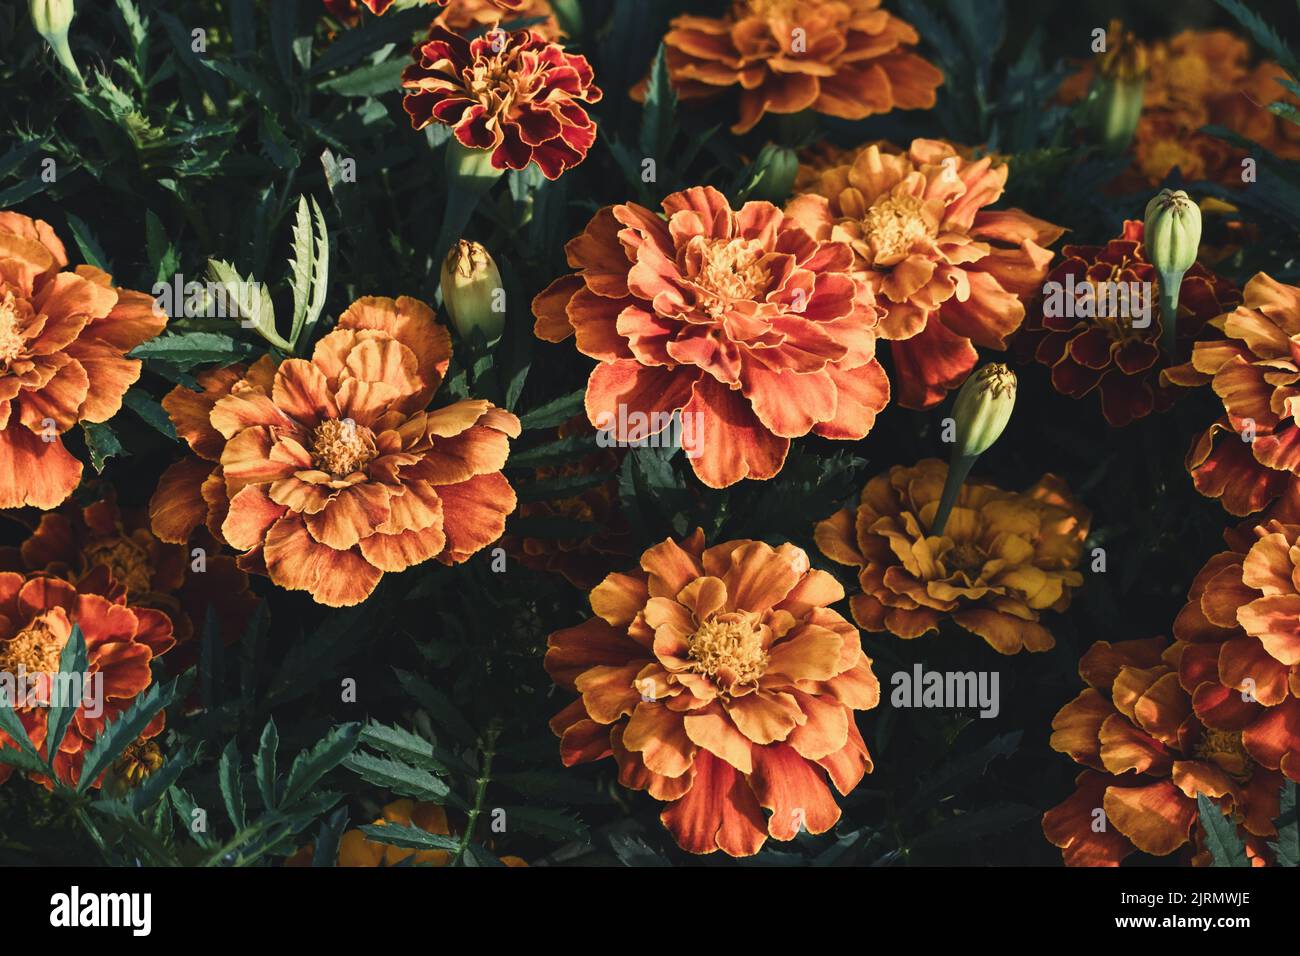 African marigold flowers in the garden, Tagetes growing closeup Stock Photo